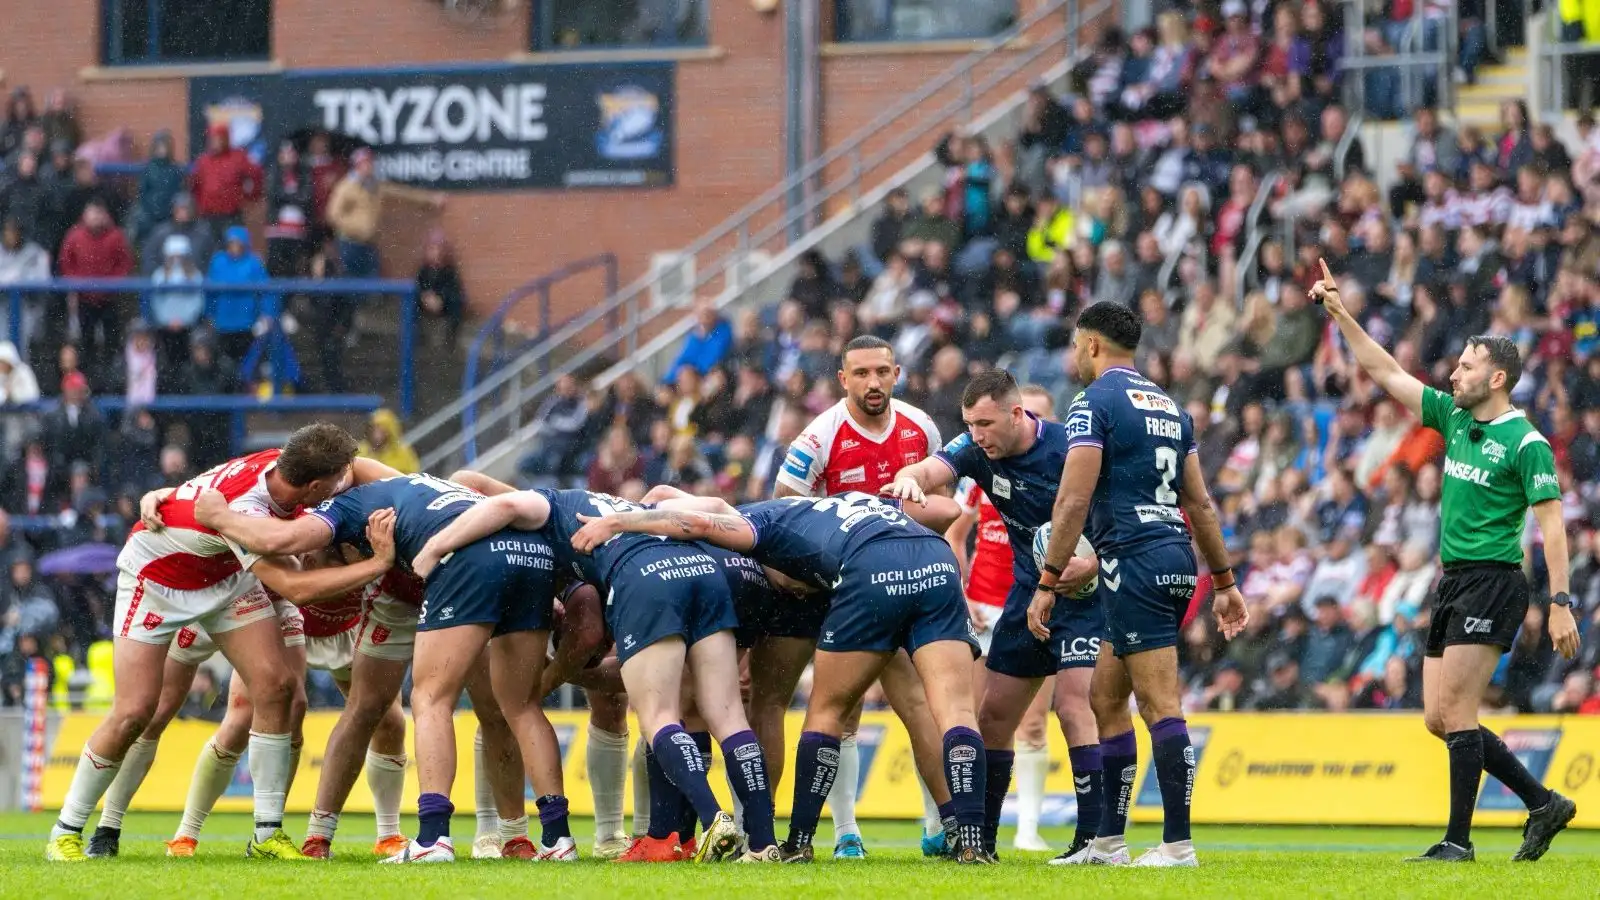 Five law changes approved by the RFL ahead of 2024 season including ‘Six Again’ rule, 18th man, ‘Reckless’ tackles